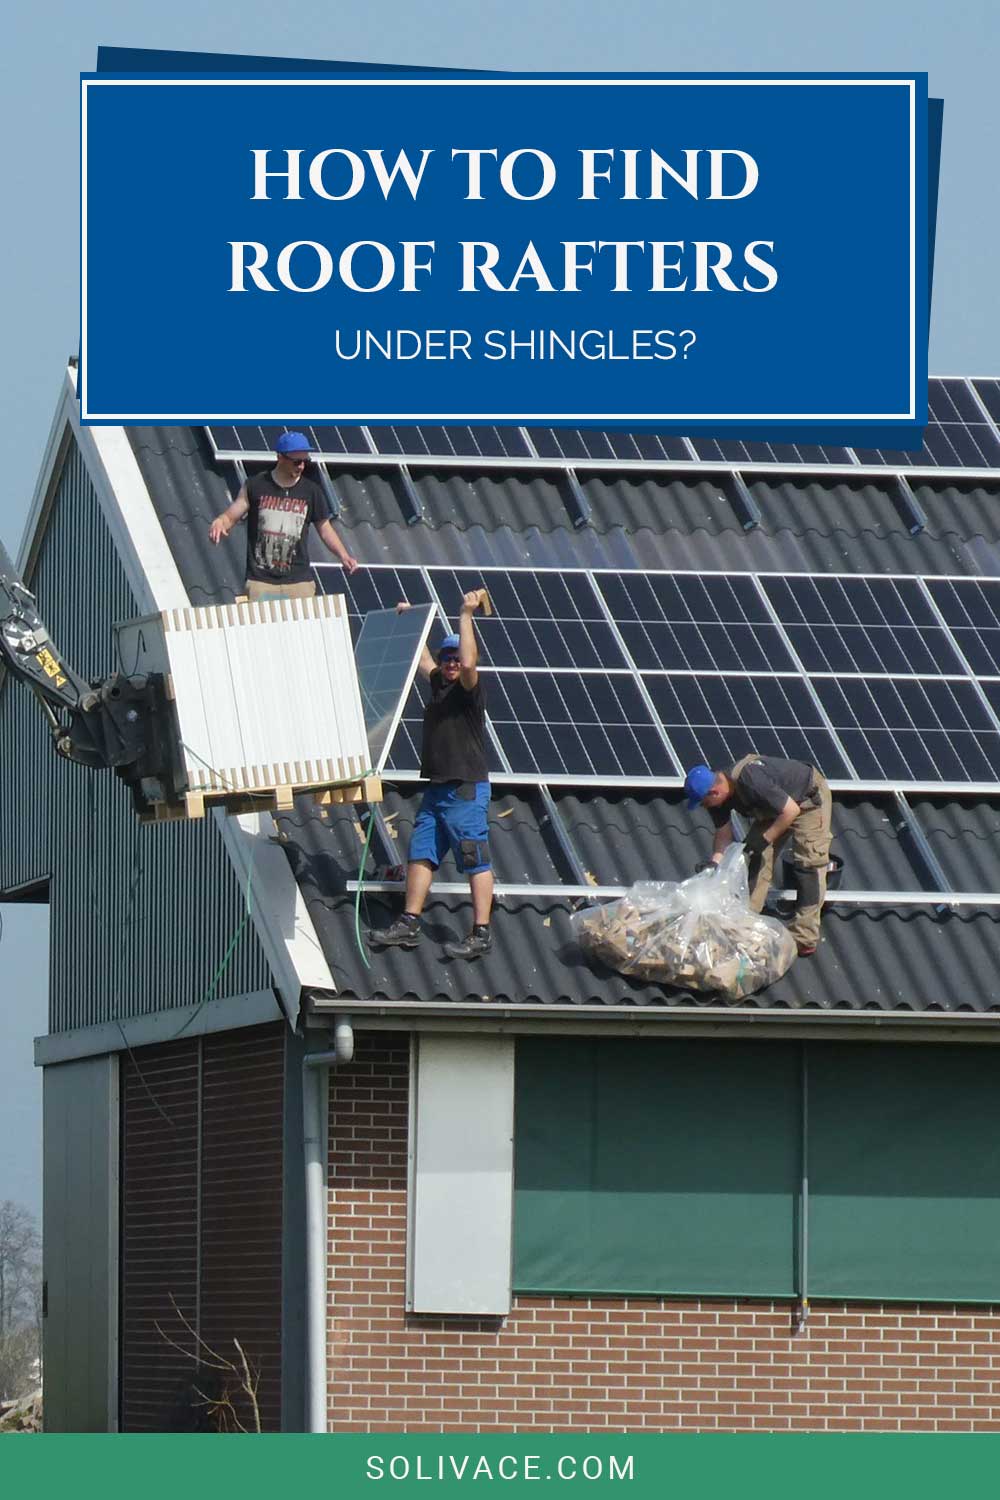 How To Find Roof Rafters Under Shingles?